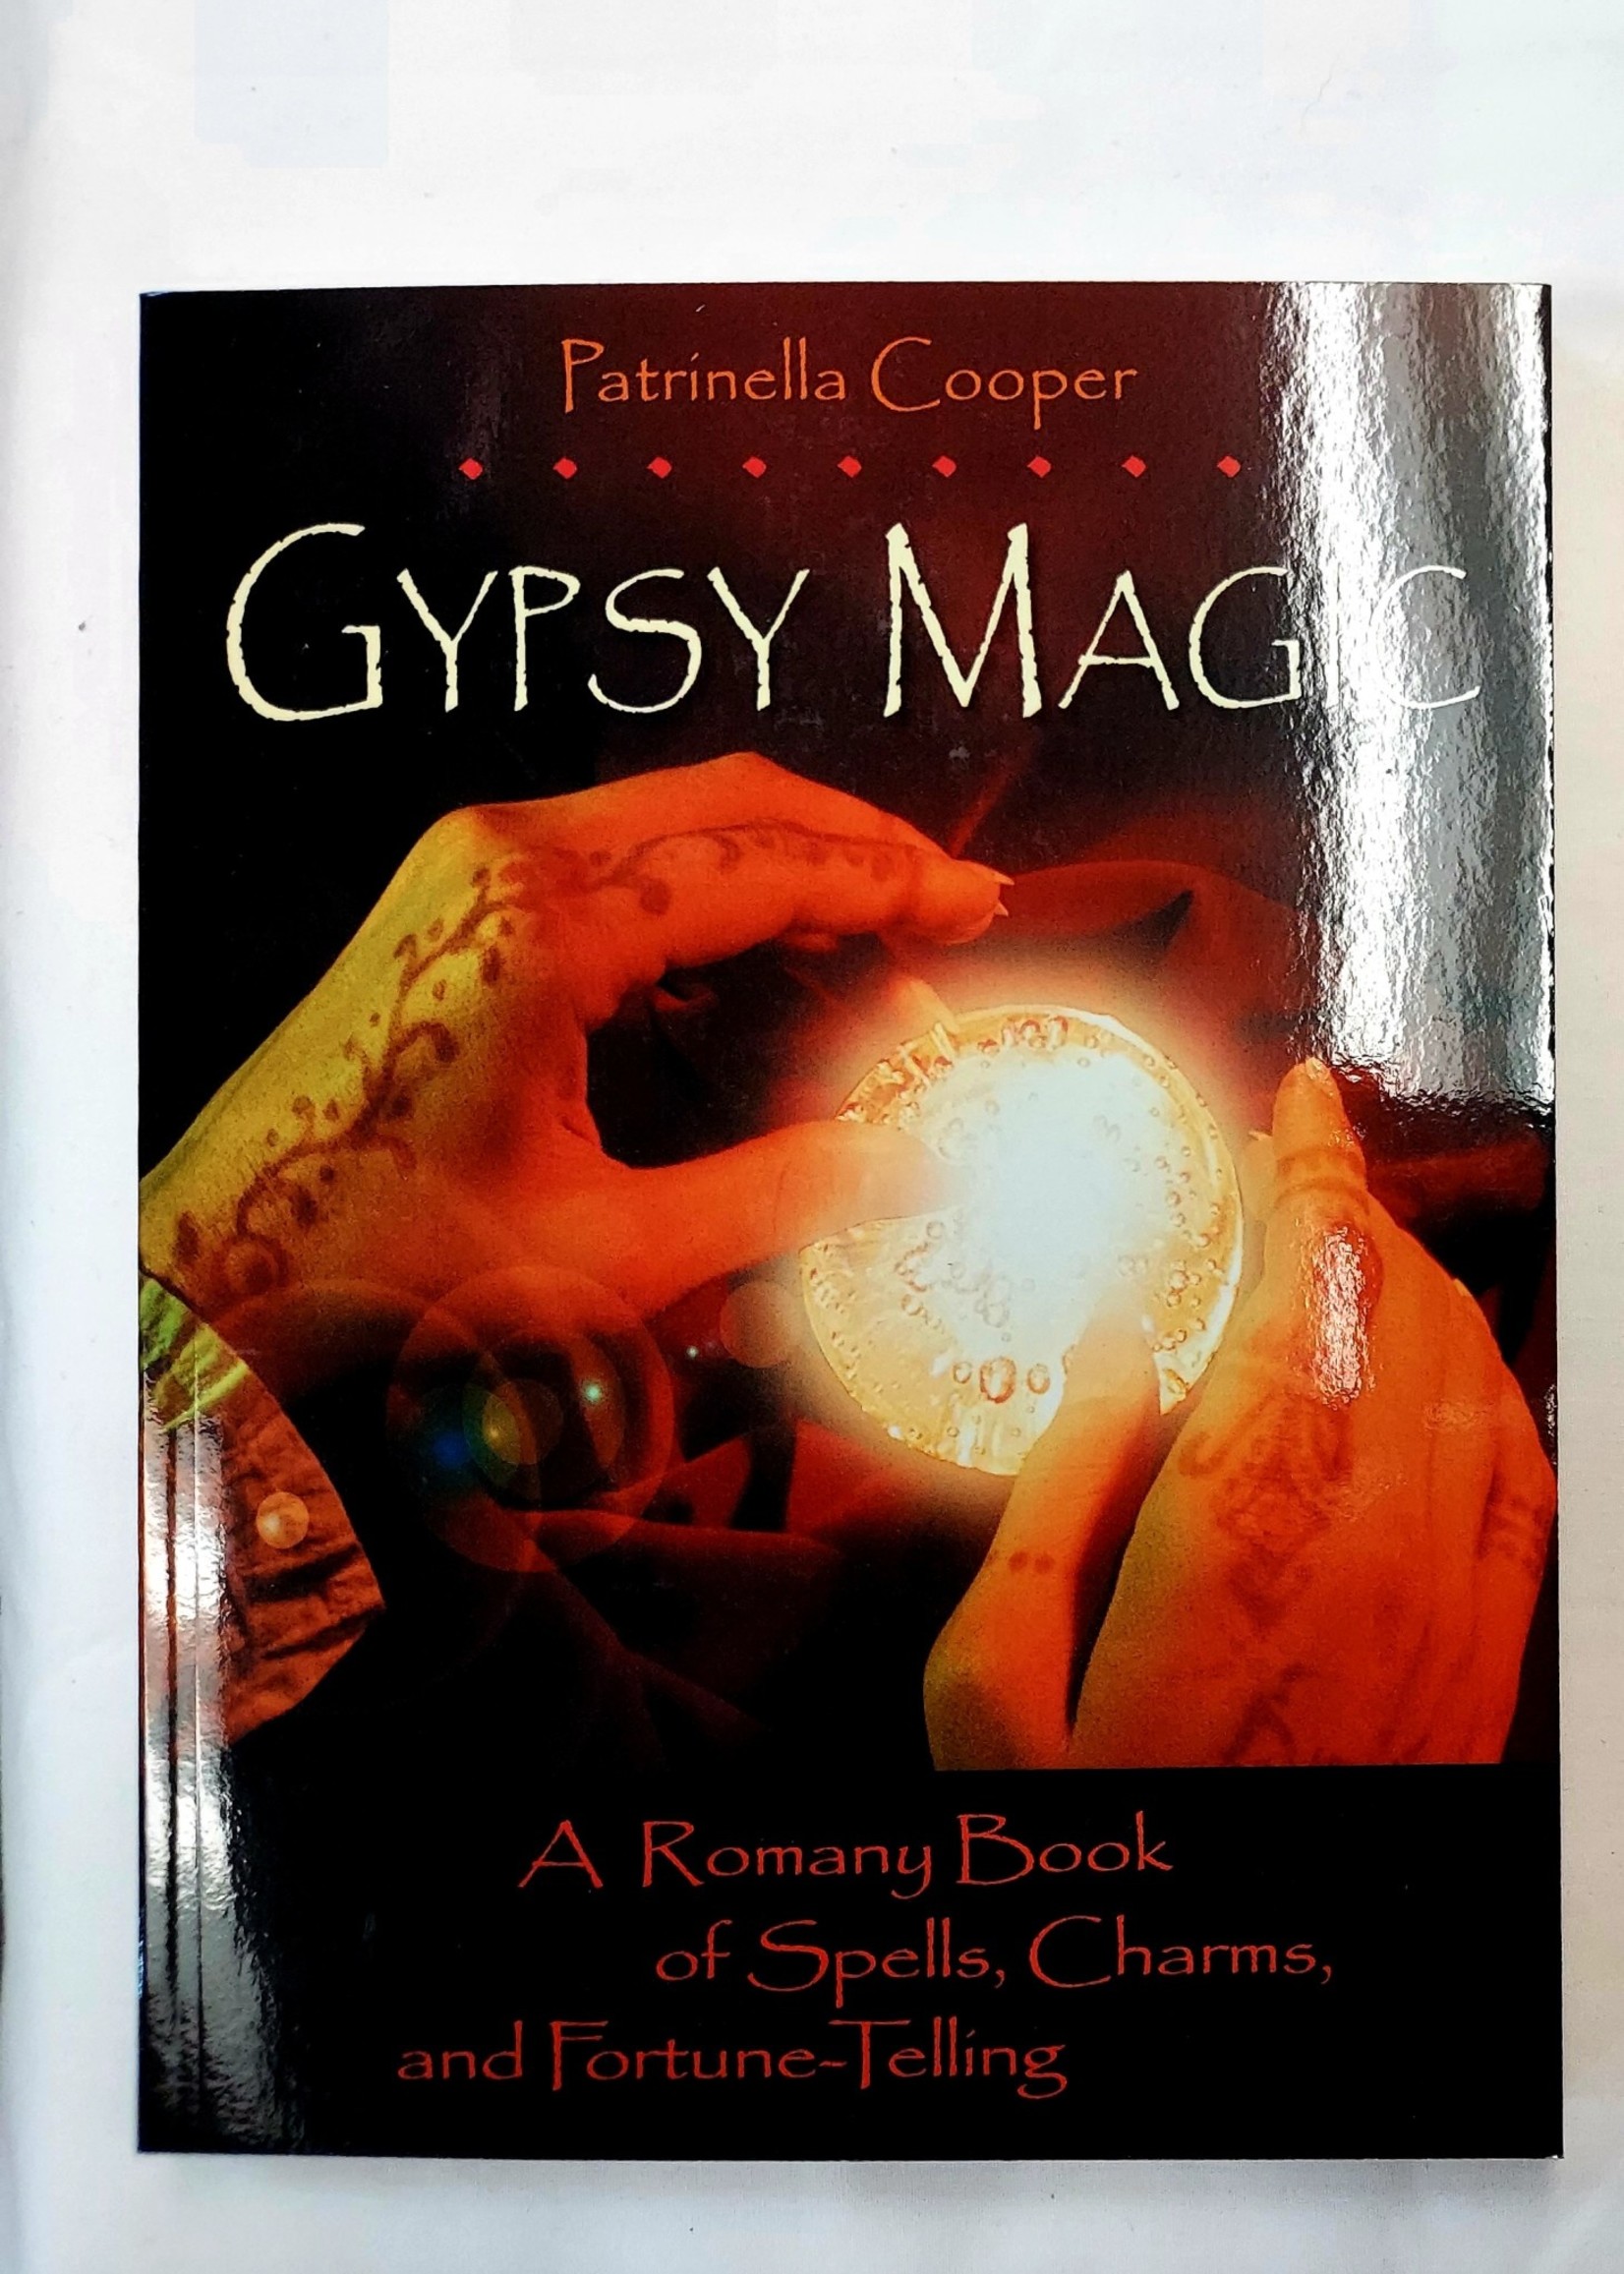 Gypsy Magic-A Romany Book of Spells, Charms, and Fortune-Telling